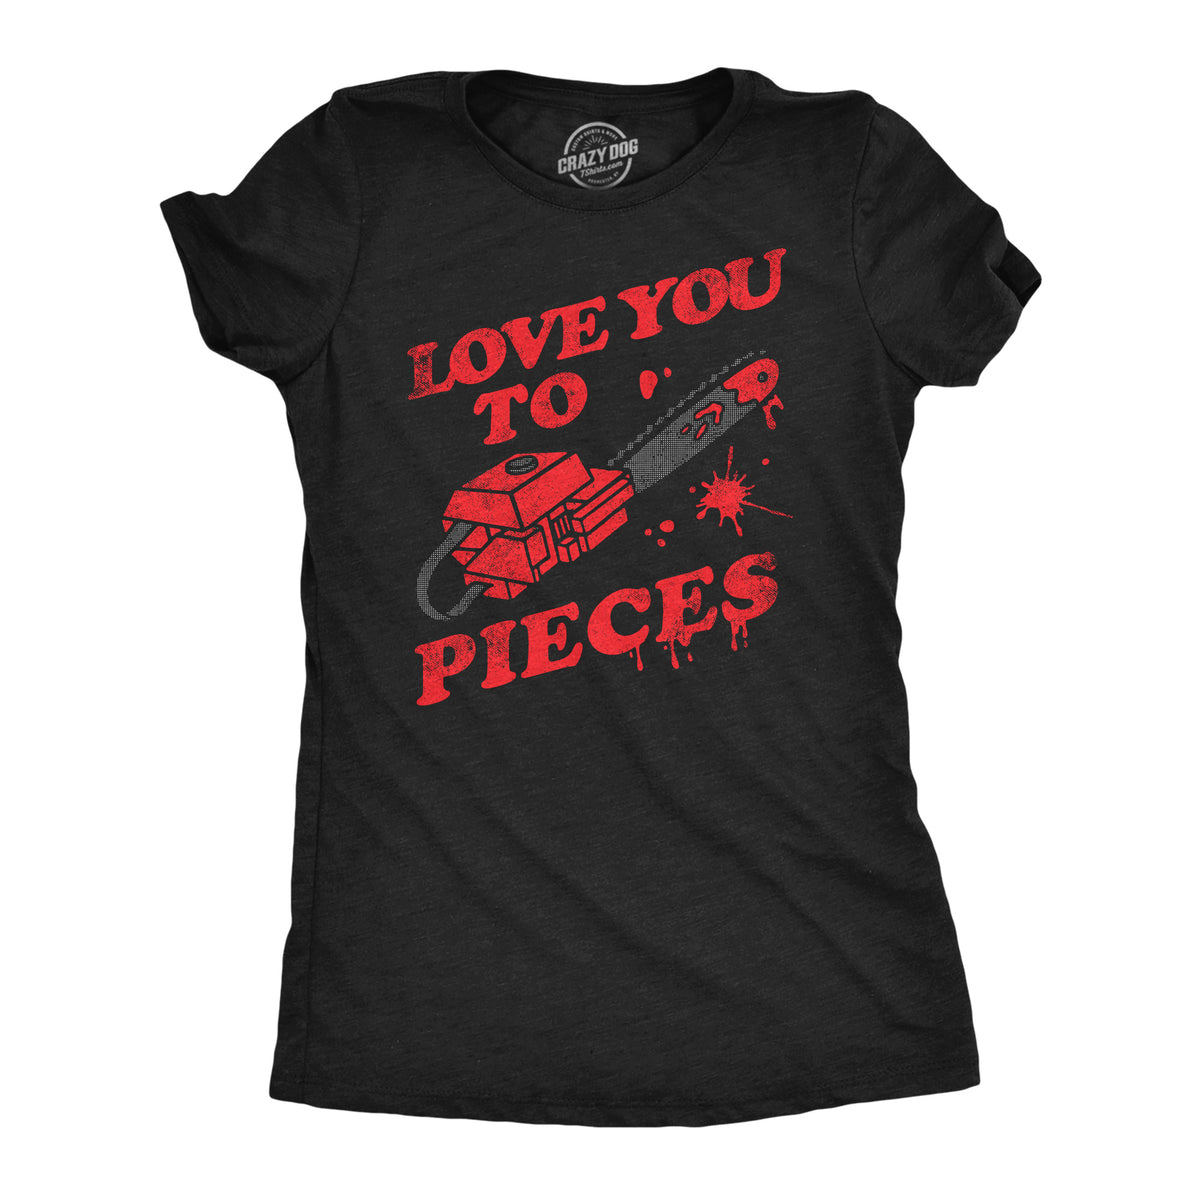 Funny Heather Black - Love You To Pieces Love You To Pieces Womens T Shirt Nerdy Valentine&#39;s Day Sarcastic Tee